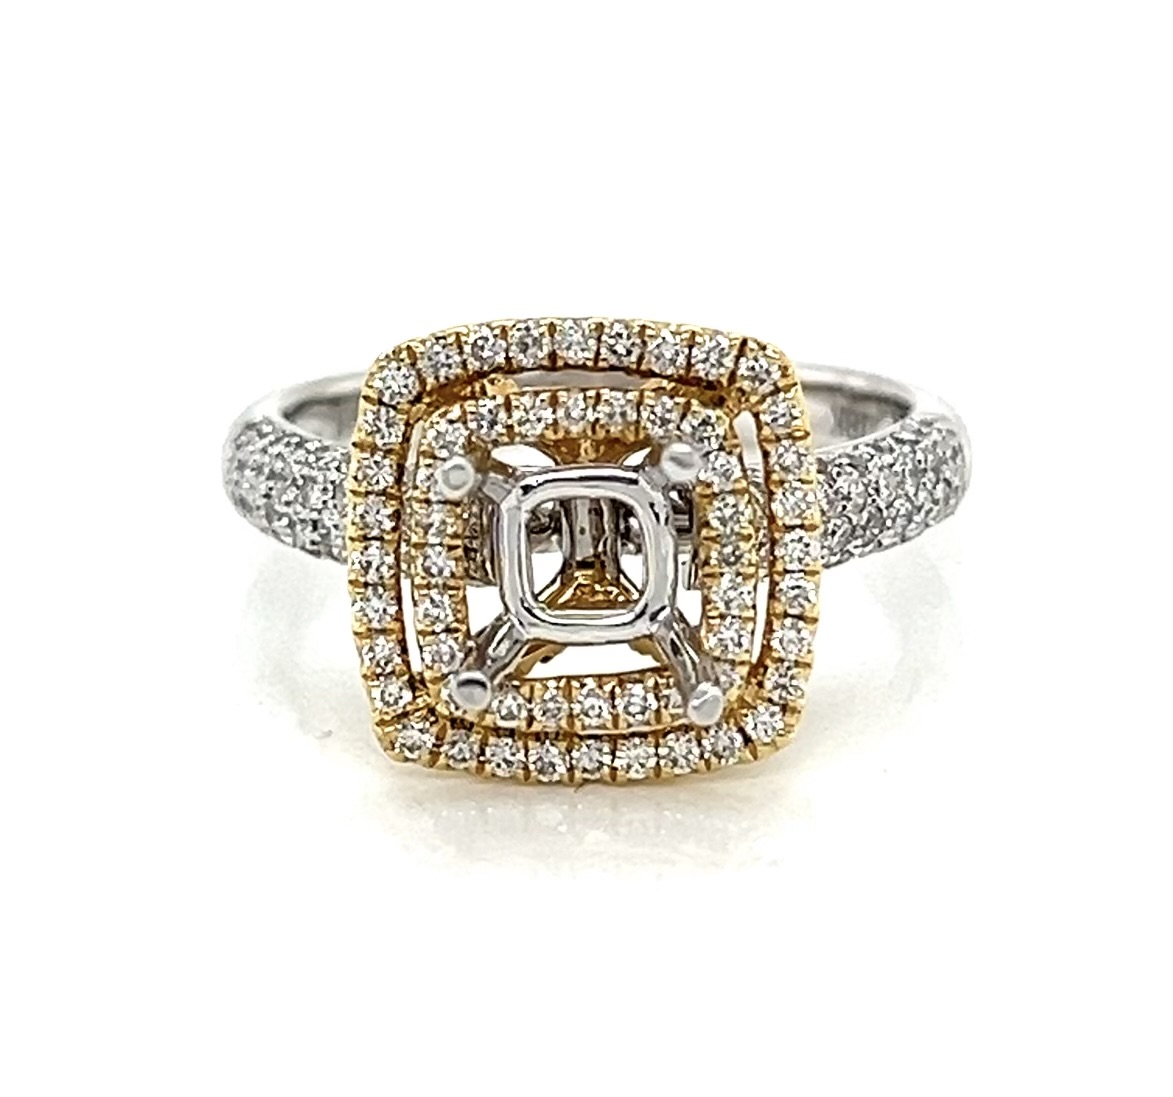 A gorgeous combination of white and yellow gold, this stunner is sure to grab her attention! 😍

(Center stone not included)

140-03102

#itsaraywardring #diamonds #loveishere #bridalmonth #ring #preferredjeweler #thinkrayward #ardmoreok #shoplocal